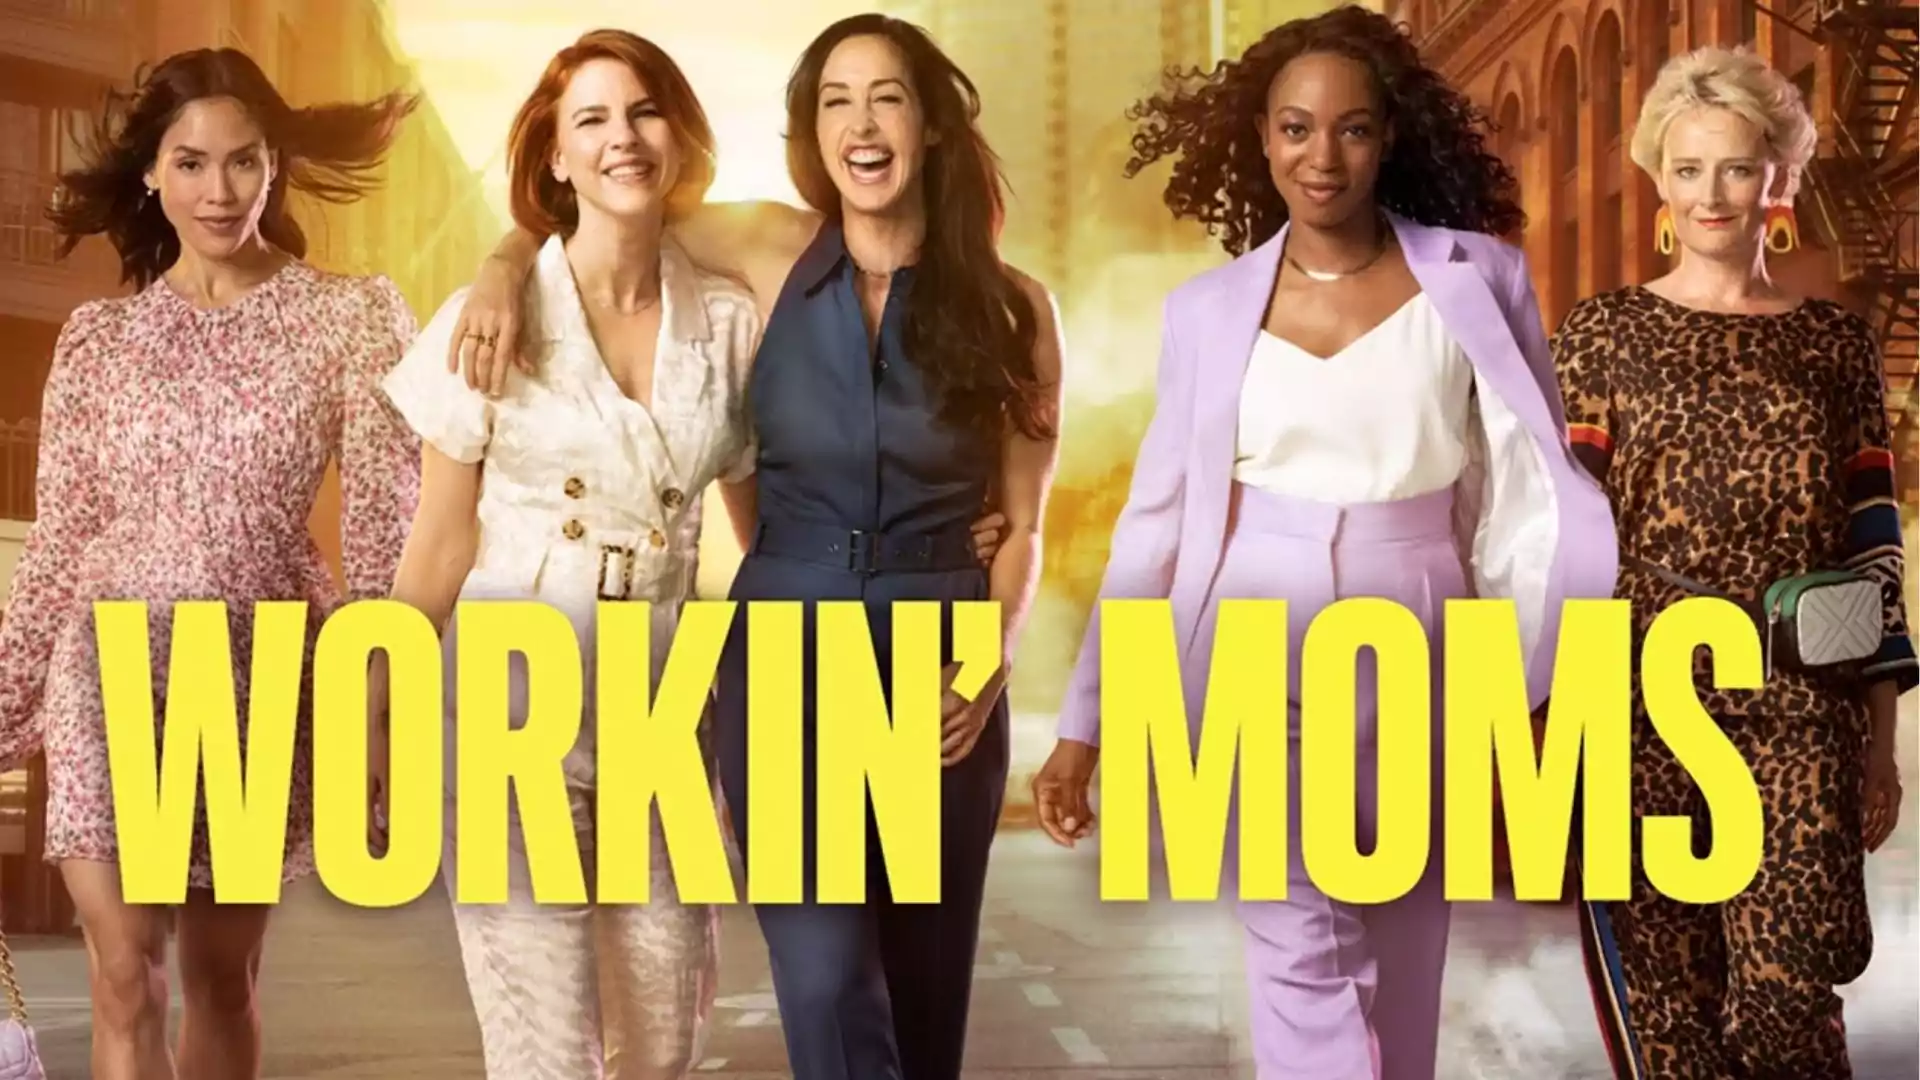 Workin' Moms Parents guide and Age Rating